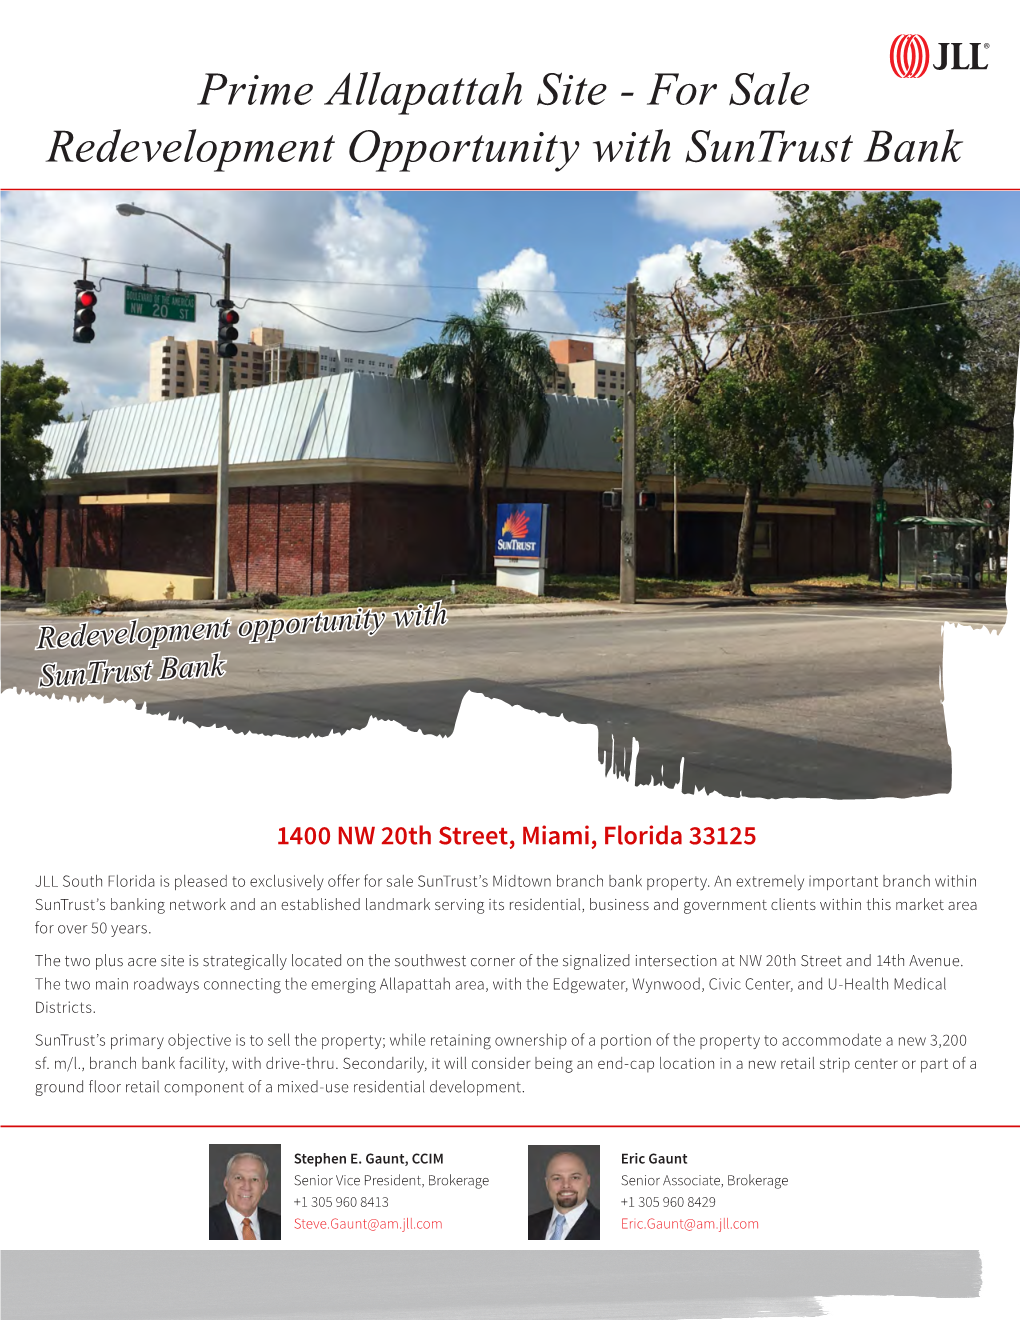 Prime Allapattah Site - for Sale Redevelopment Opportunity with Suntrust Bank